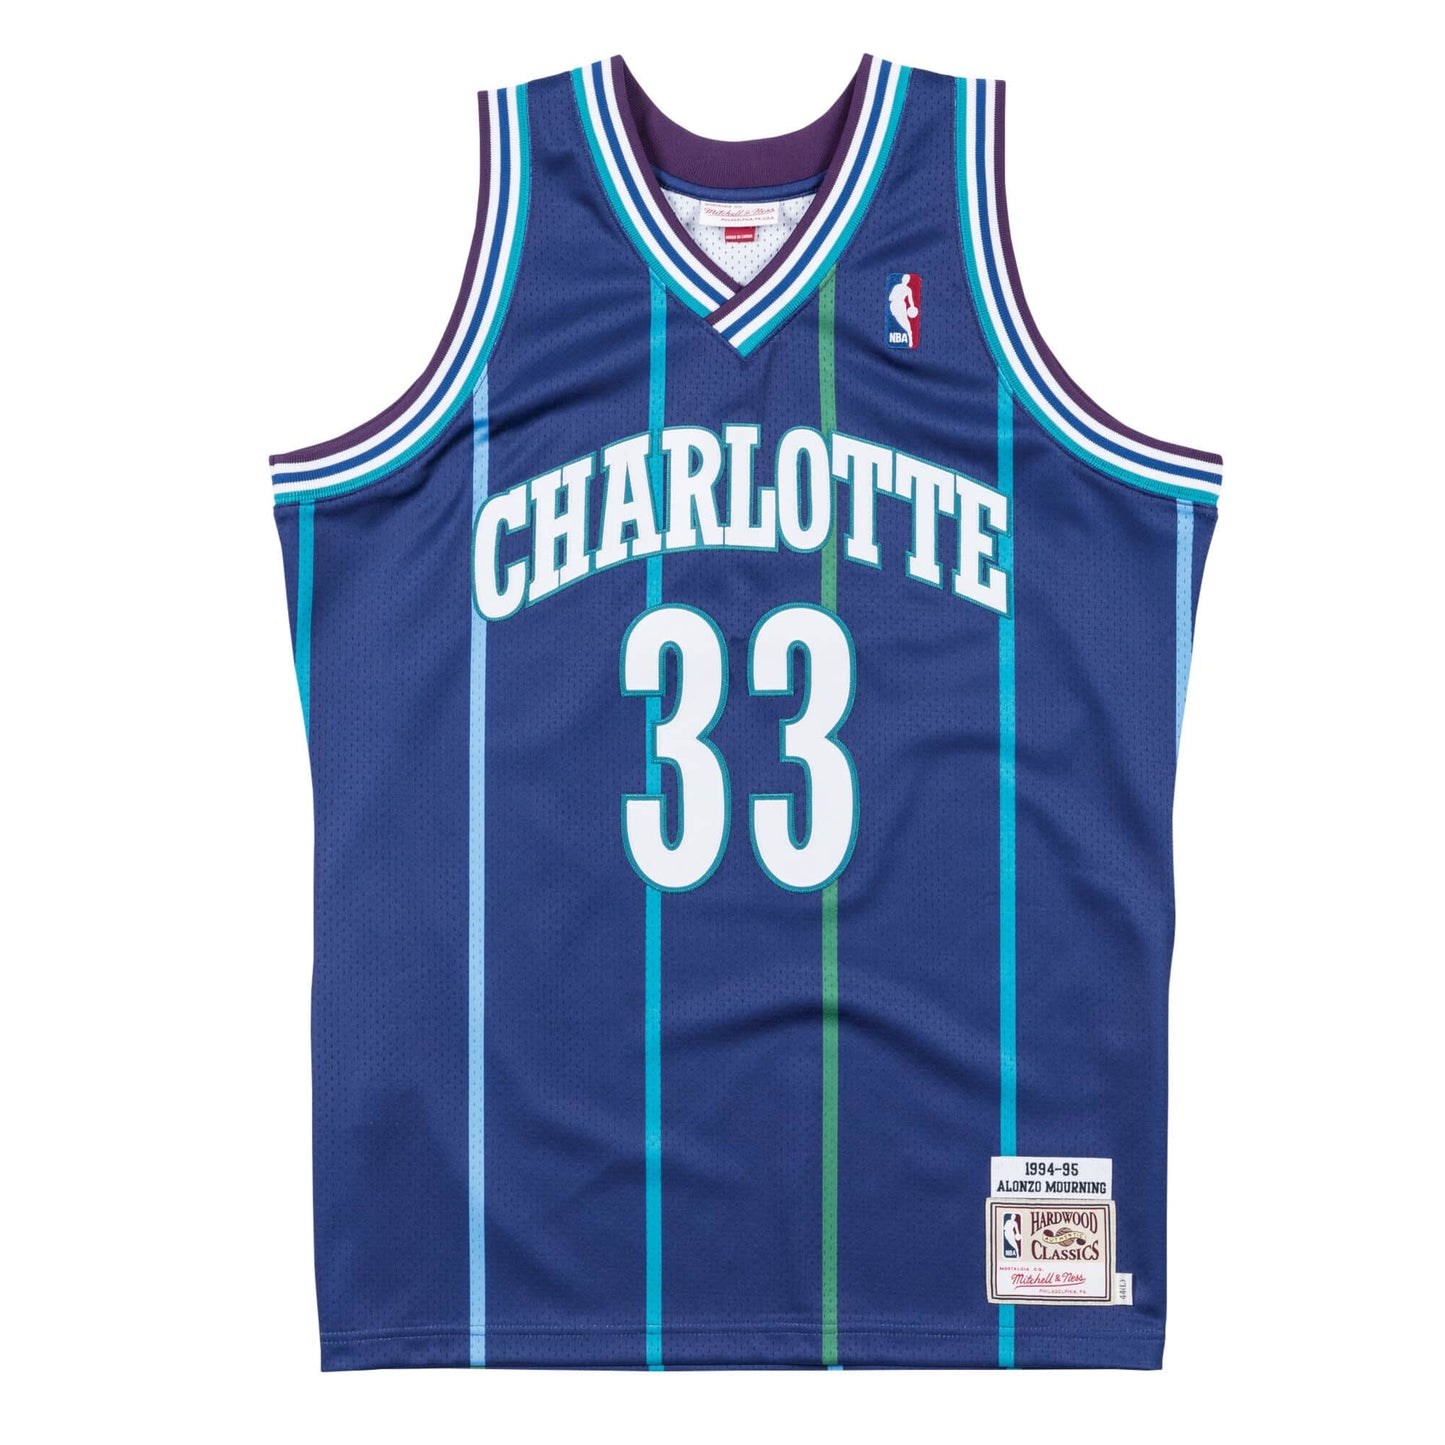 Authentic Jersey Charlotte Hornets 1994-95 Alonzo Mourning